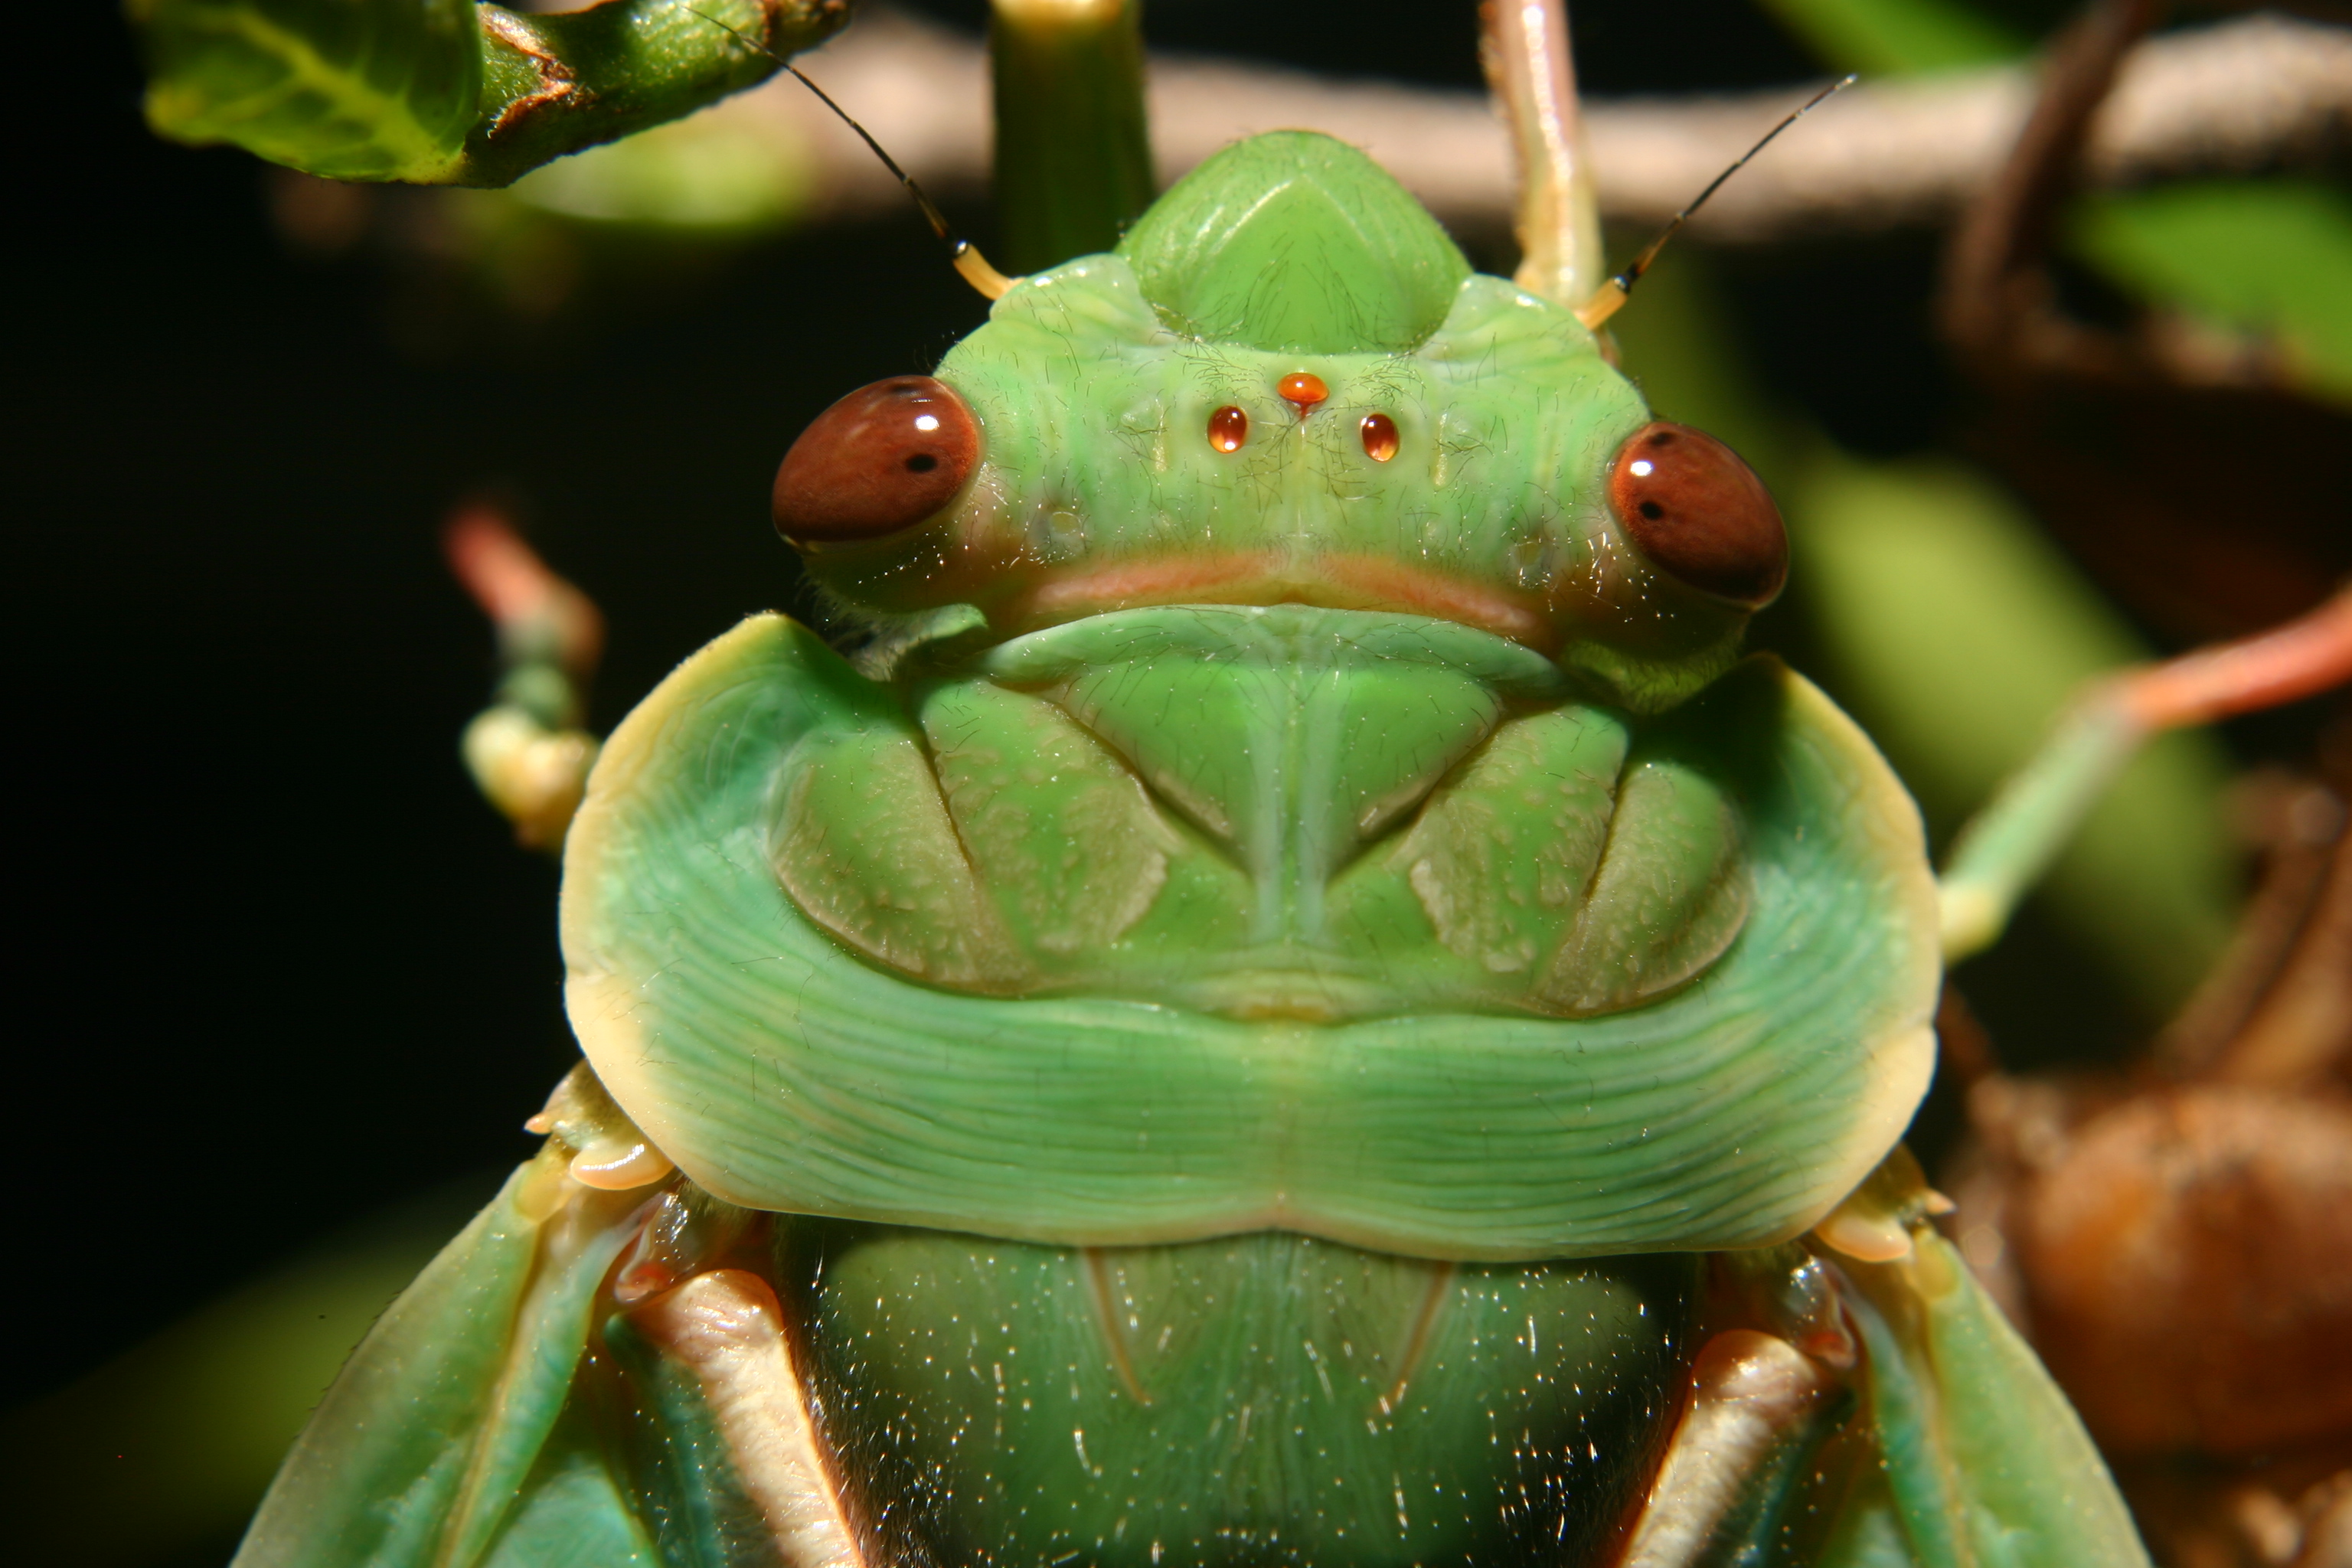 File:Green Grocer Cicada close up.jpg - Wikimedia Commons